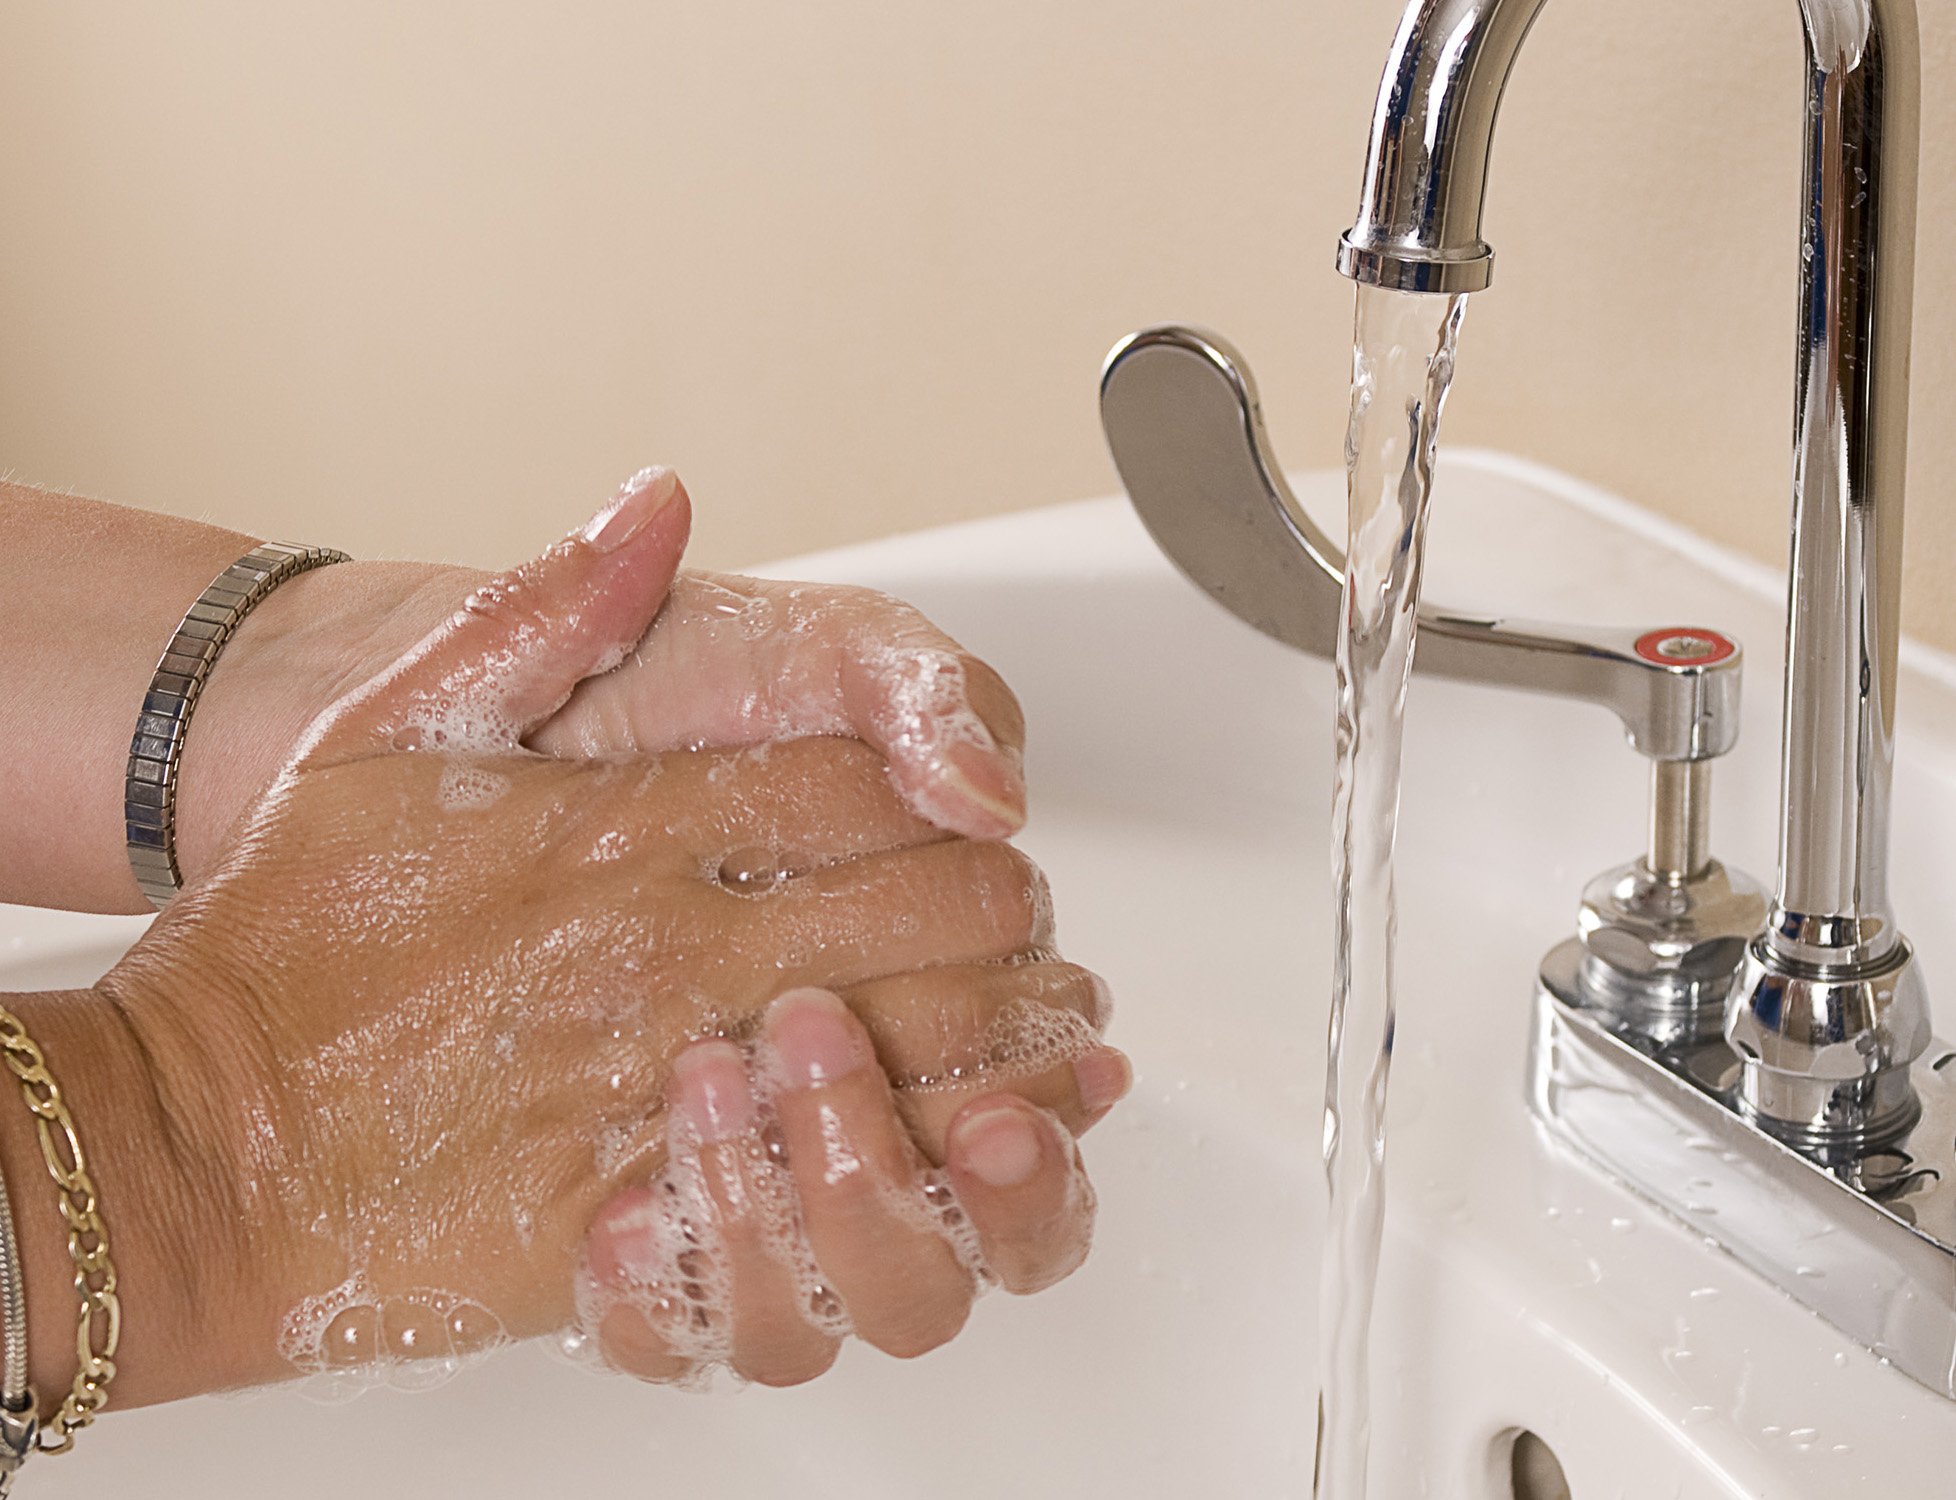 Frequent hand-washing is among the steps recommended to help prevent the spread of infectious diseases to susceptible persons. (Credit: Centers for Disease Control and Prevention)